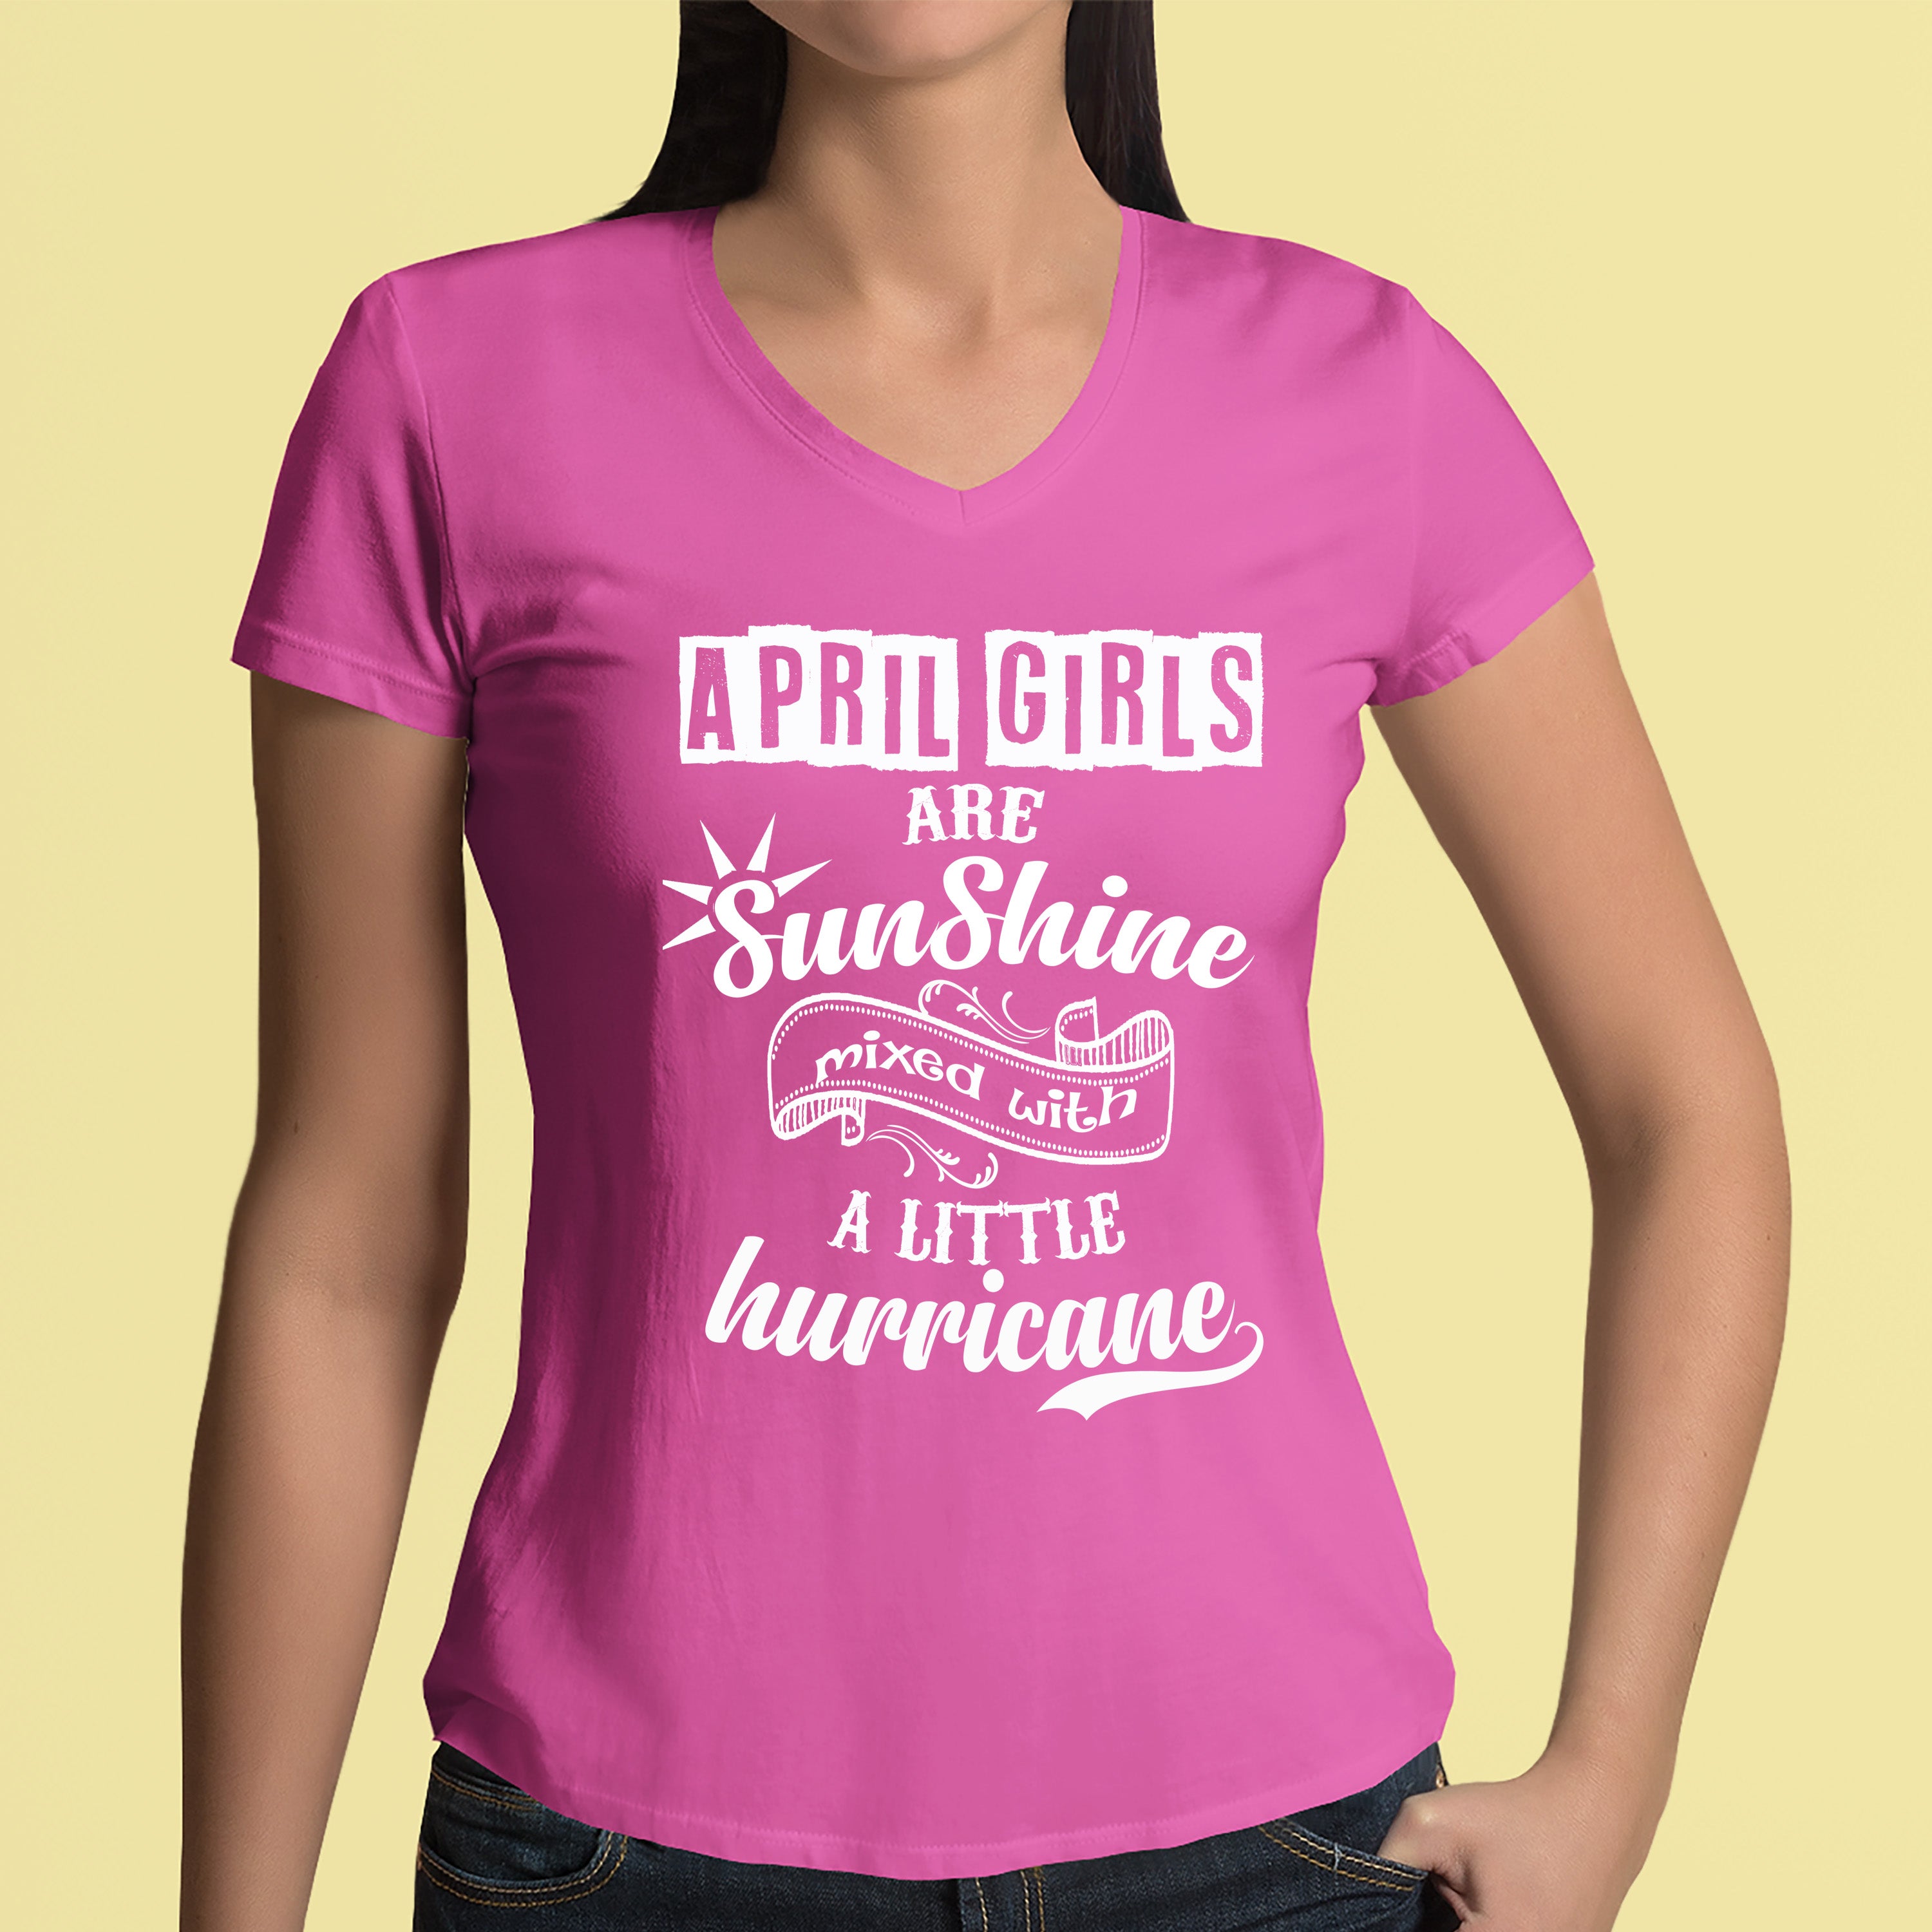 "April Girls Are Sunshine Mixed With Hurricane"